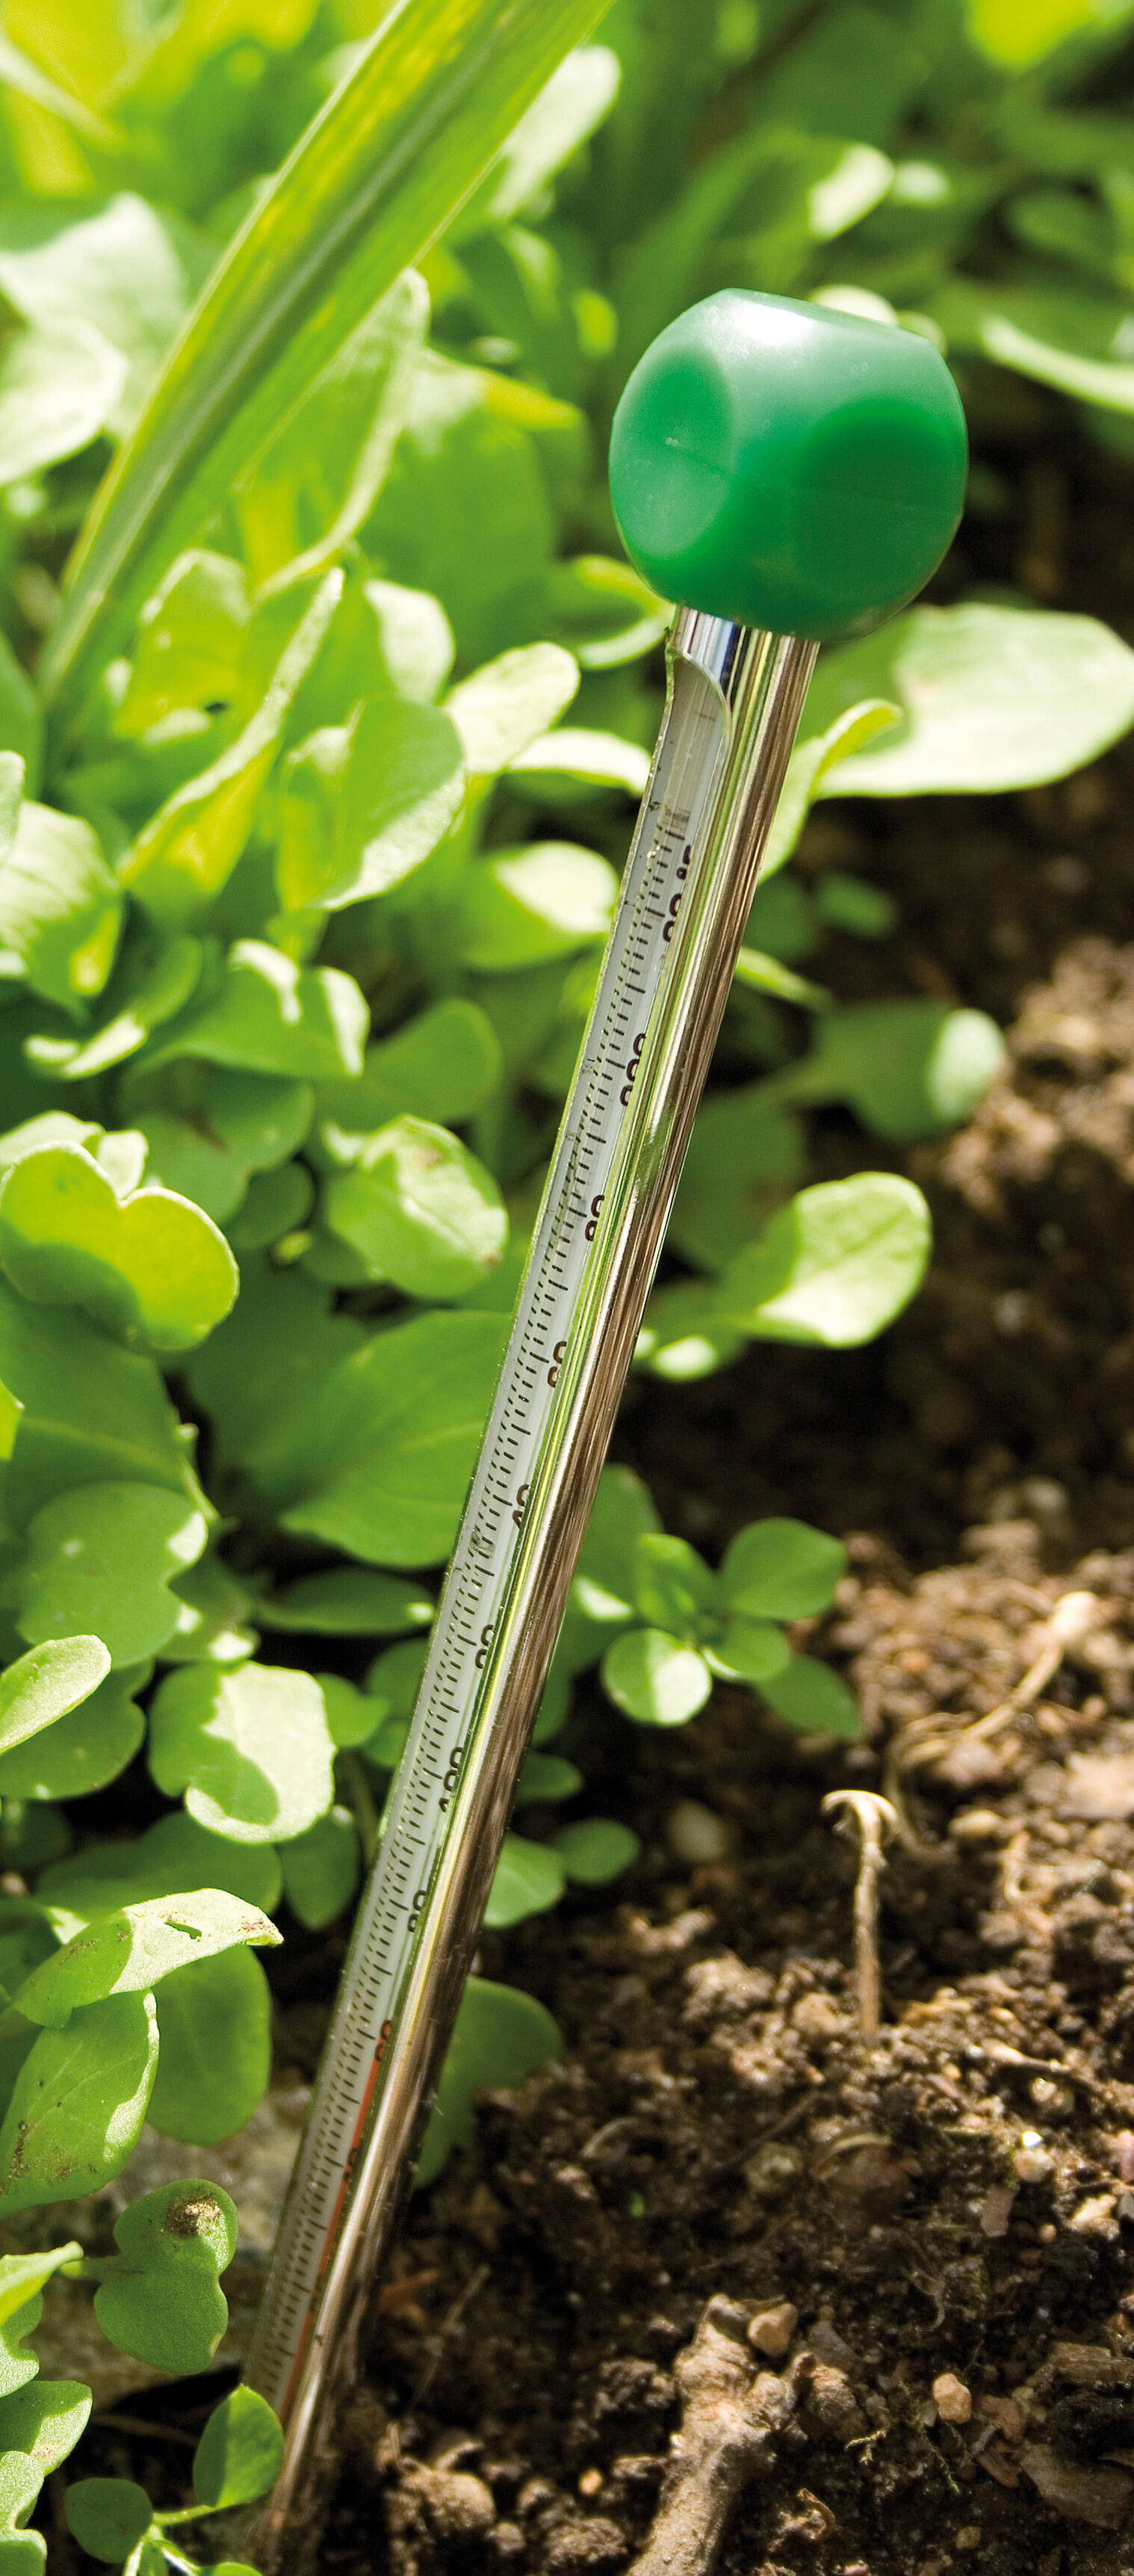 https://www.nelsongarden.pl/globalassets/products/5796_soil_thermometer_image_2_1130701.jpg